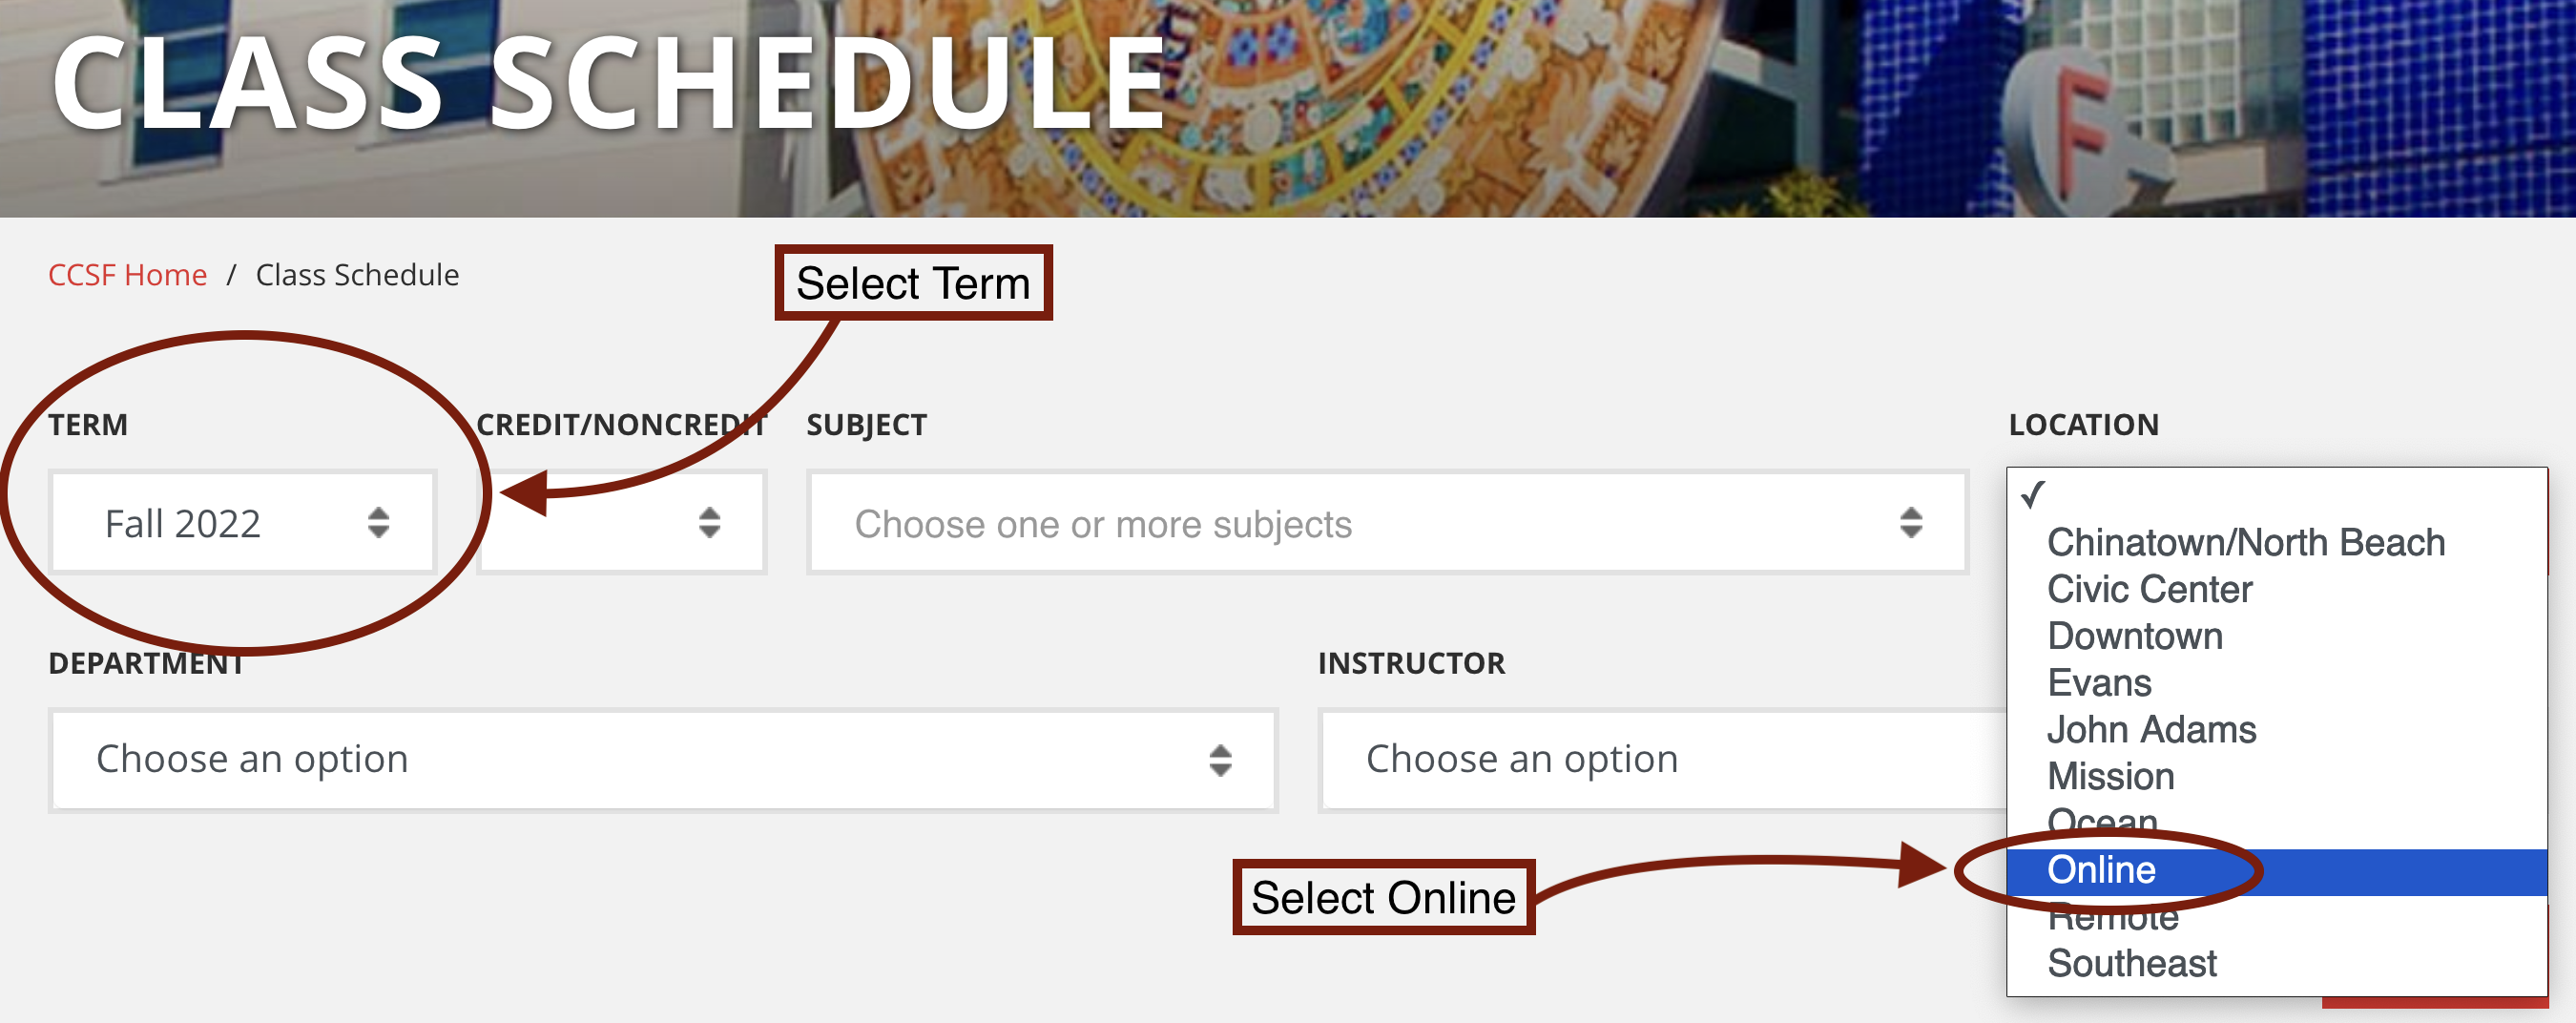 Select Term and Select Online are noted in the screenshot for searching for online classes.